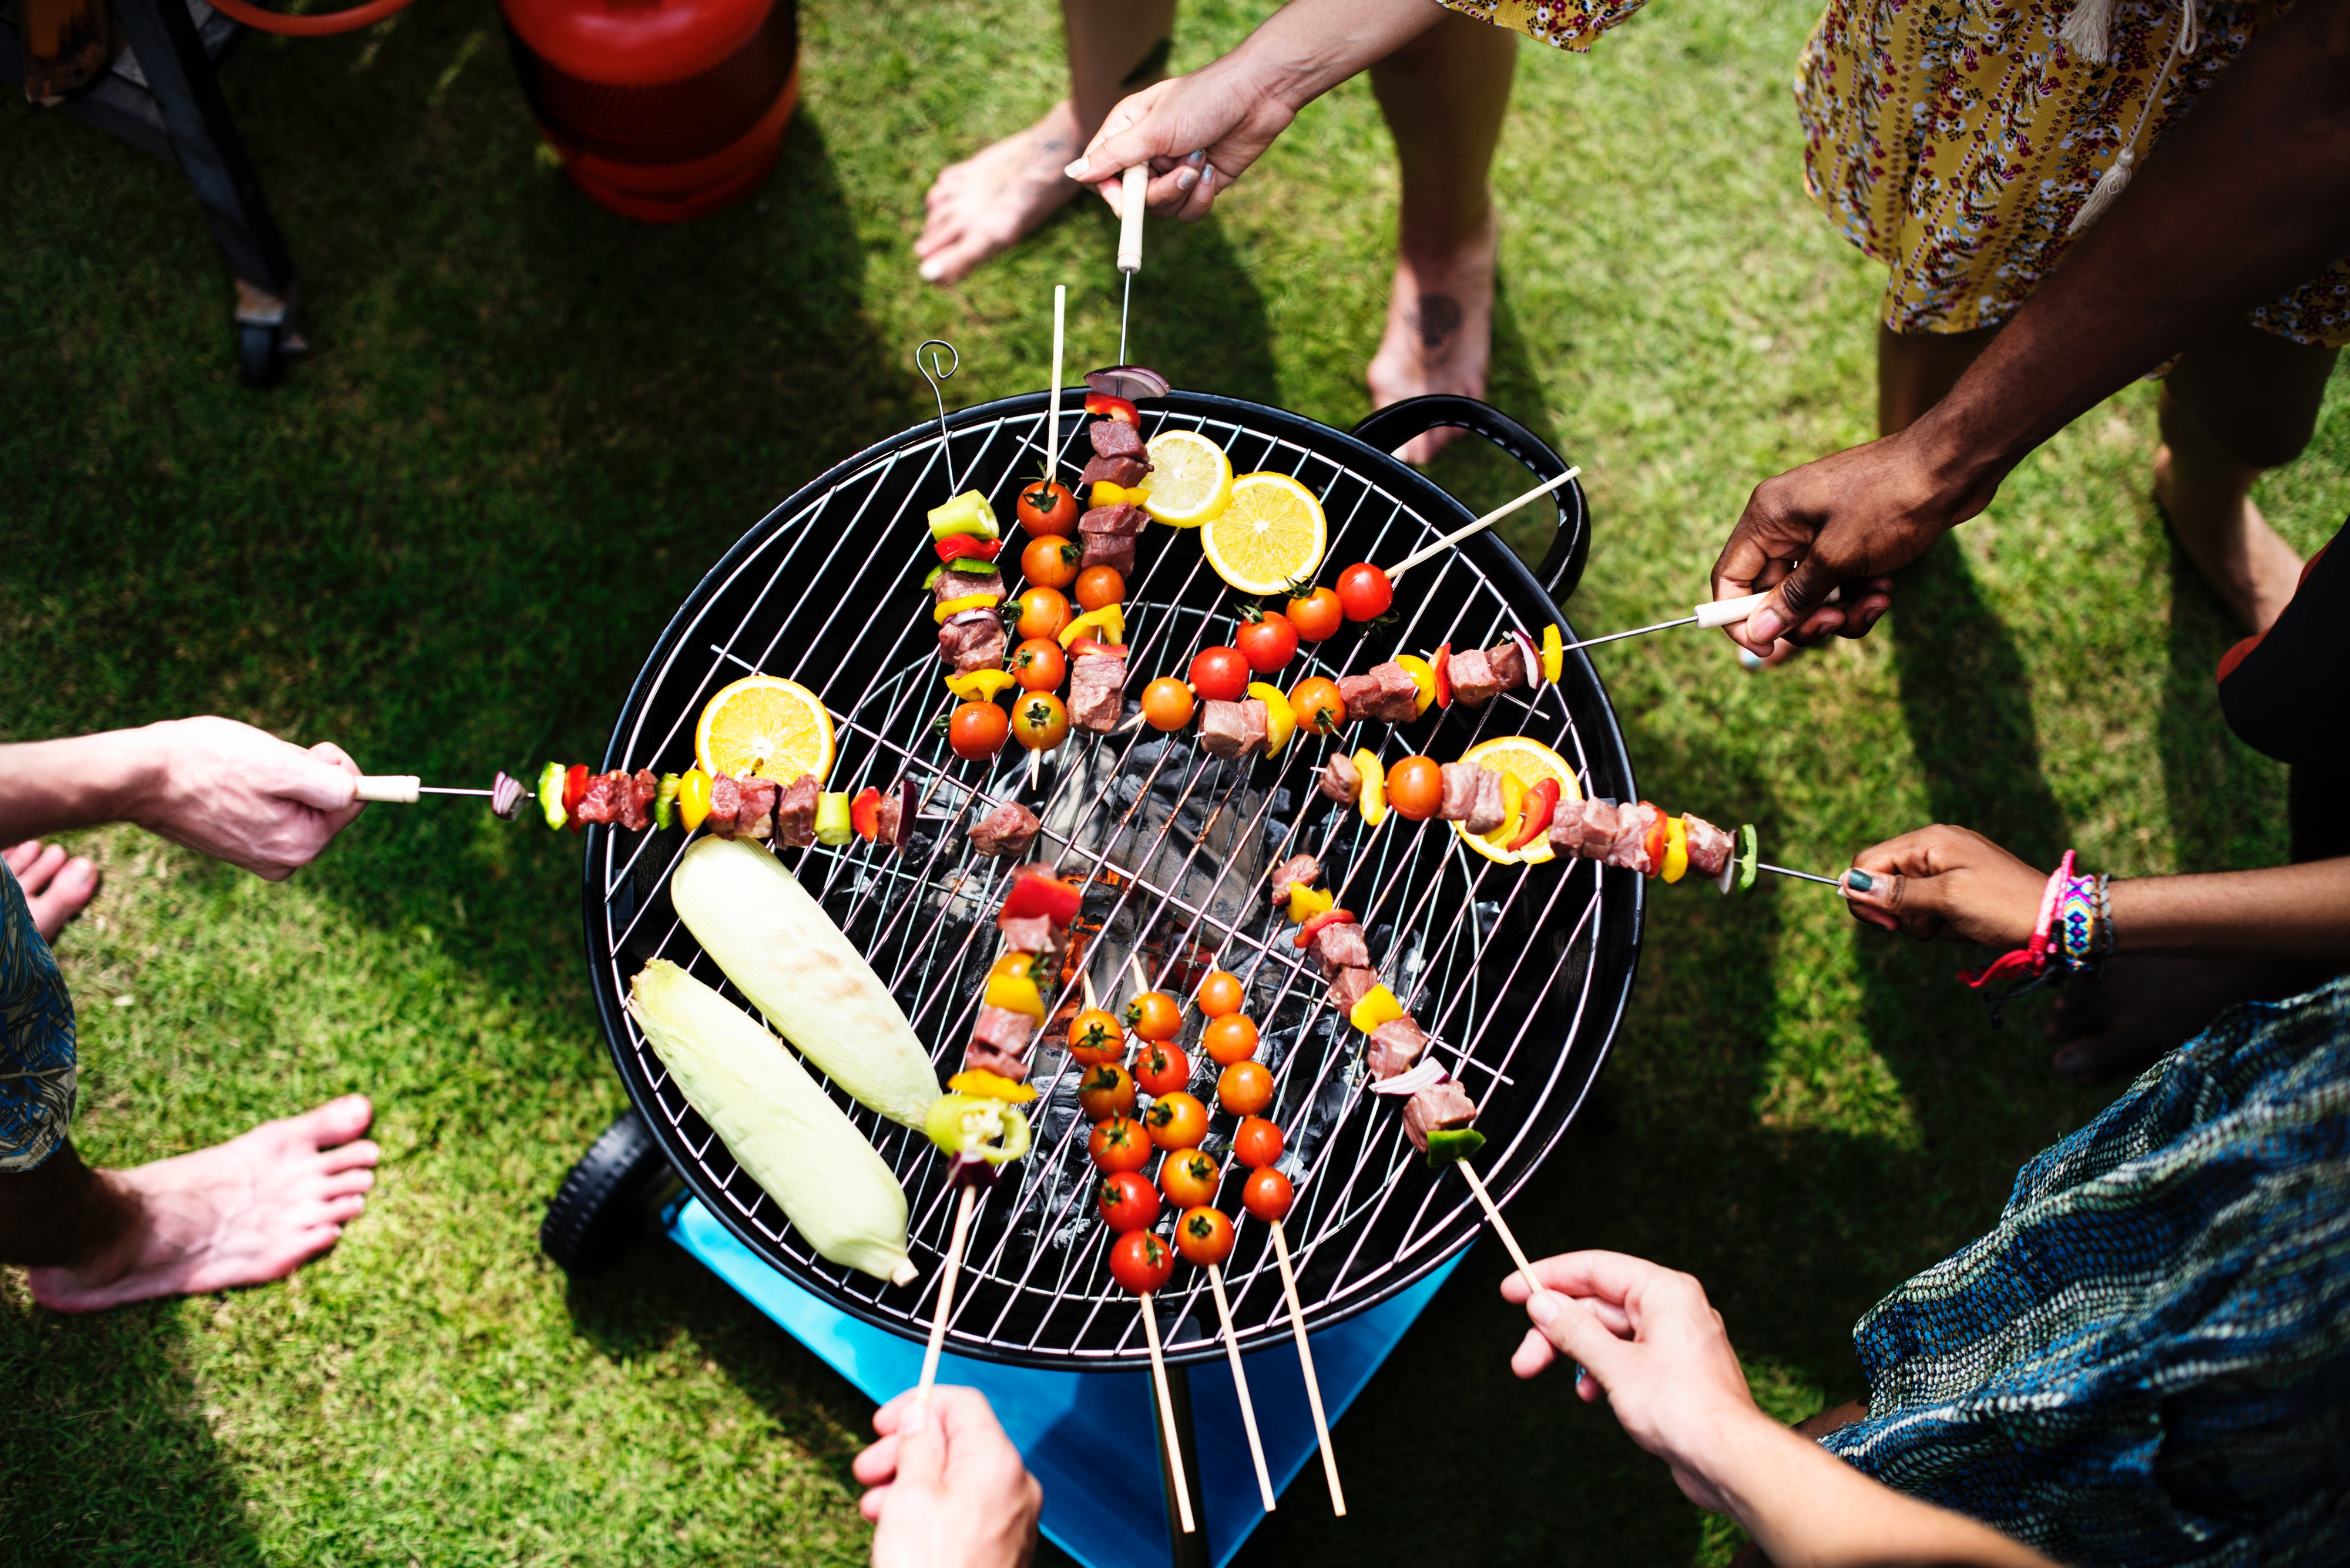 adults-aerial-barbecue-1260310